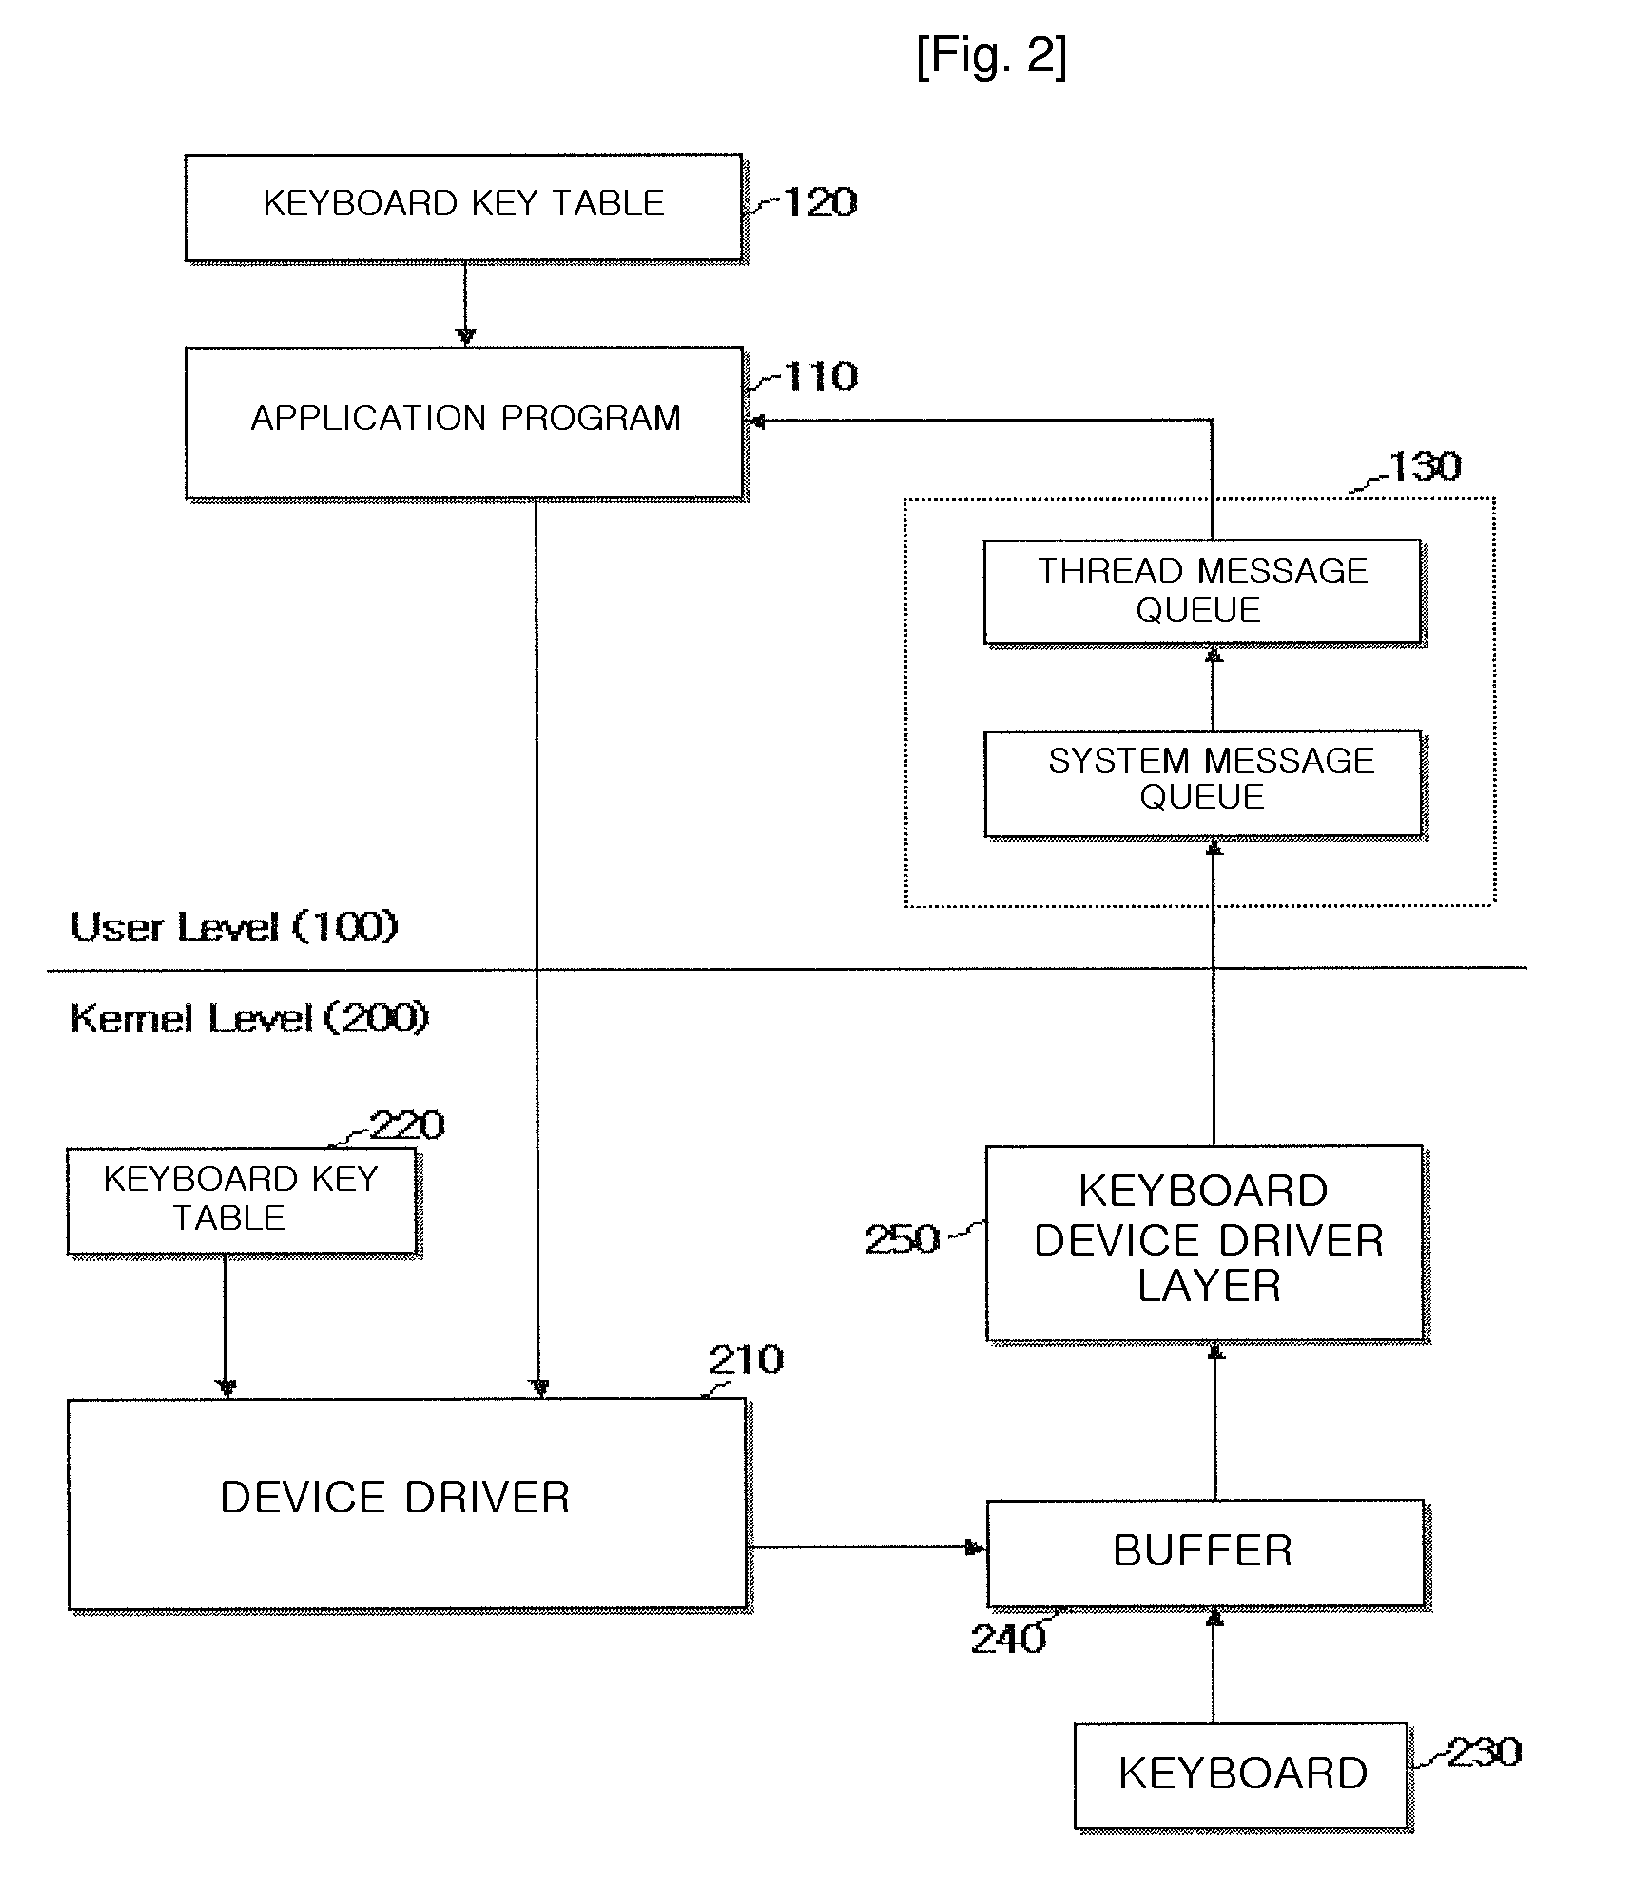 Method For Preventing Key Logger From Hacking Data Typed on Keyboard Through Autorization of Keyboard Data